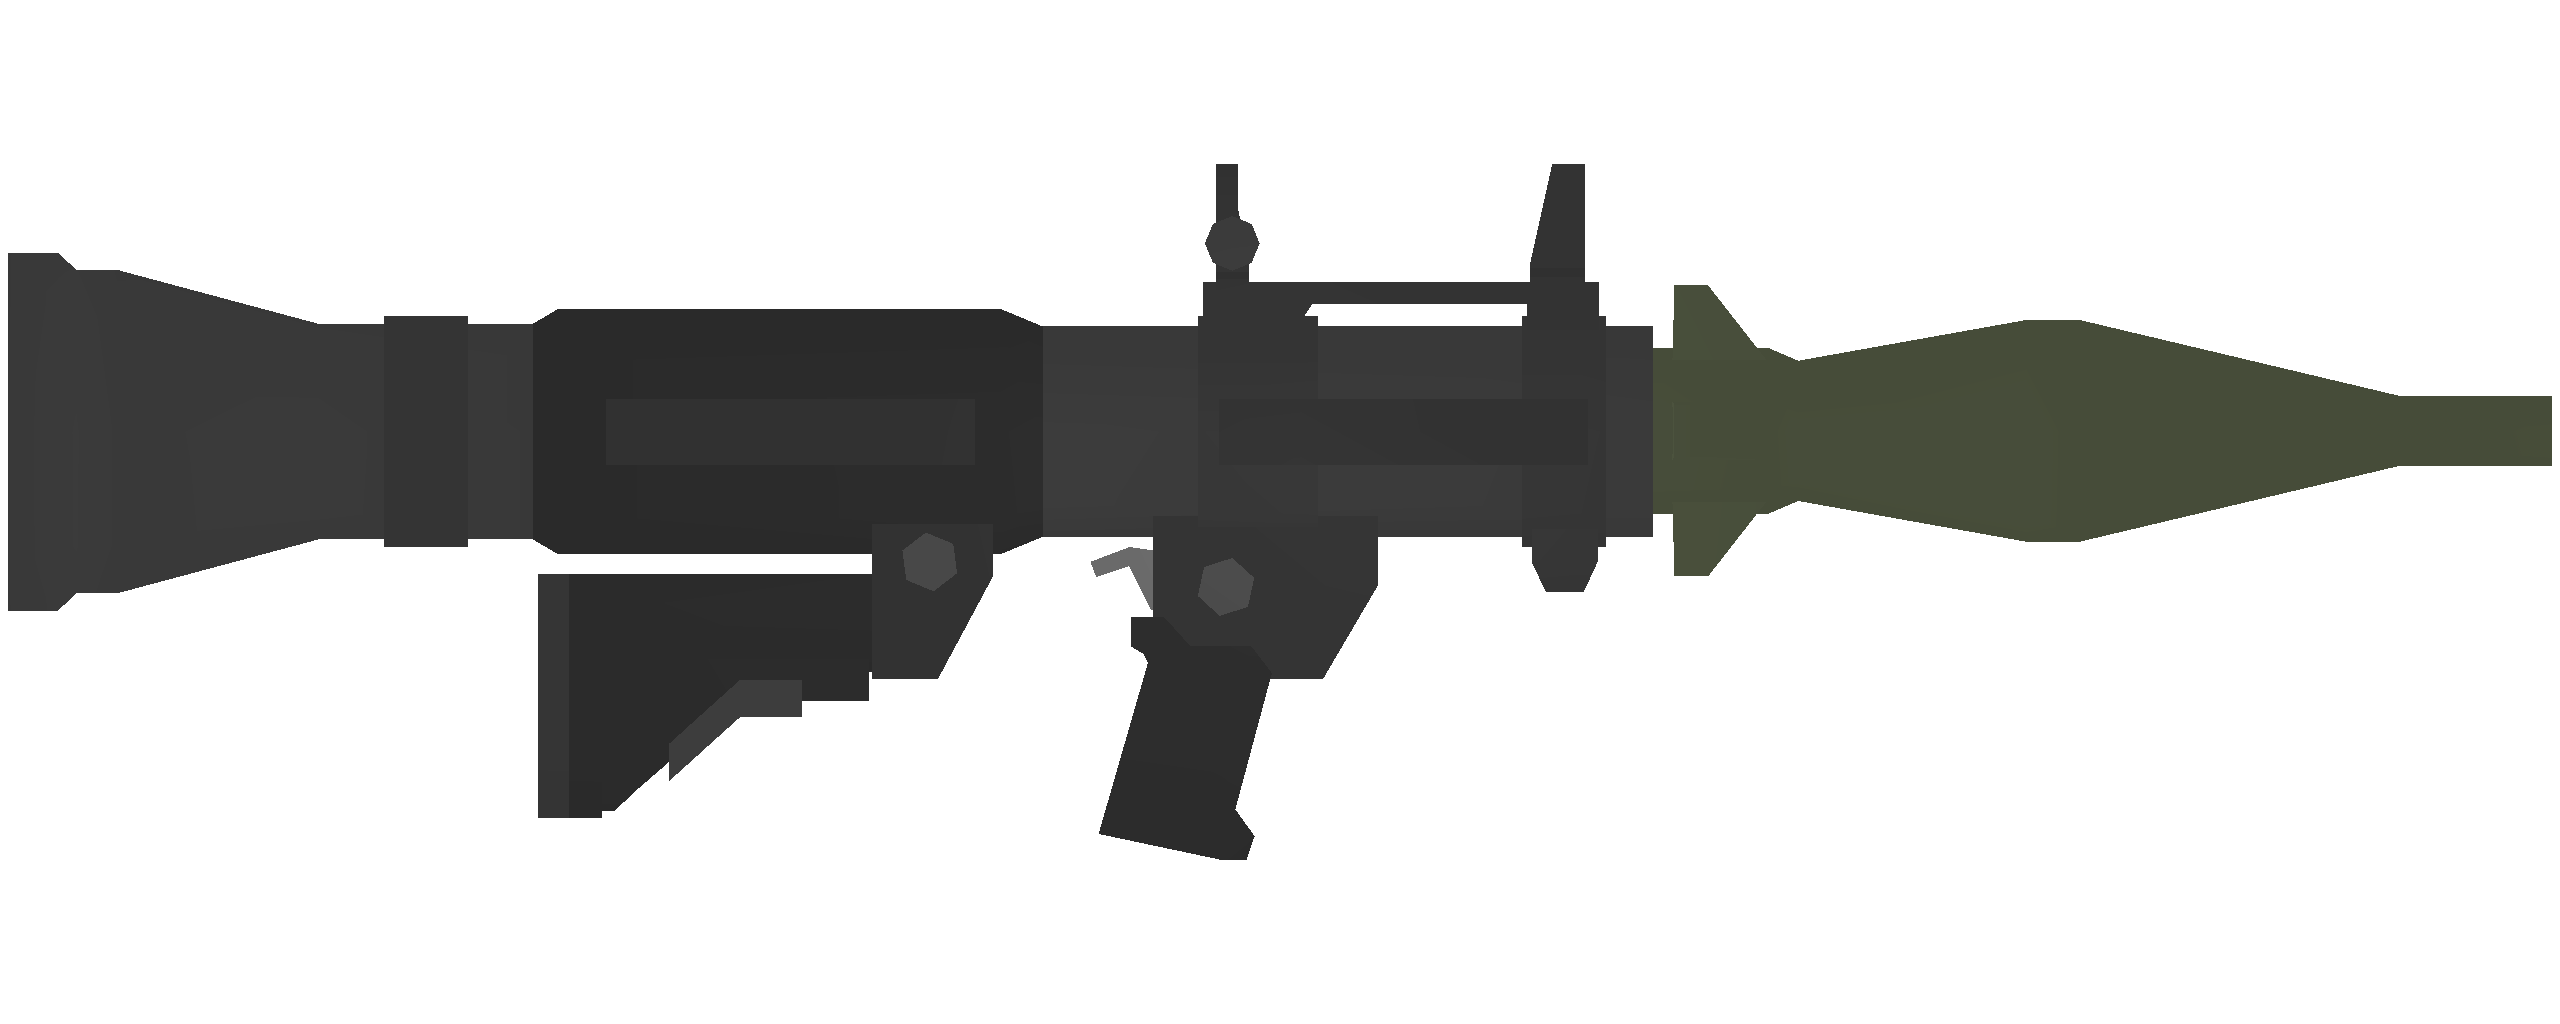 Unturned - Kuwait Items Redux + ID List for Magazines and Attachments - Special Weapons - 2999B69